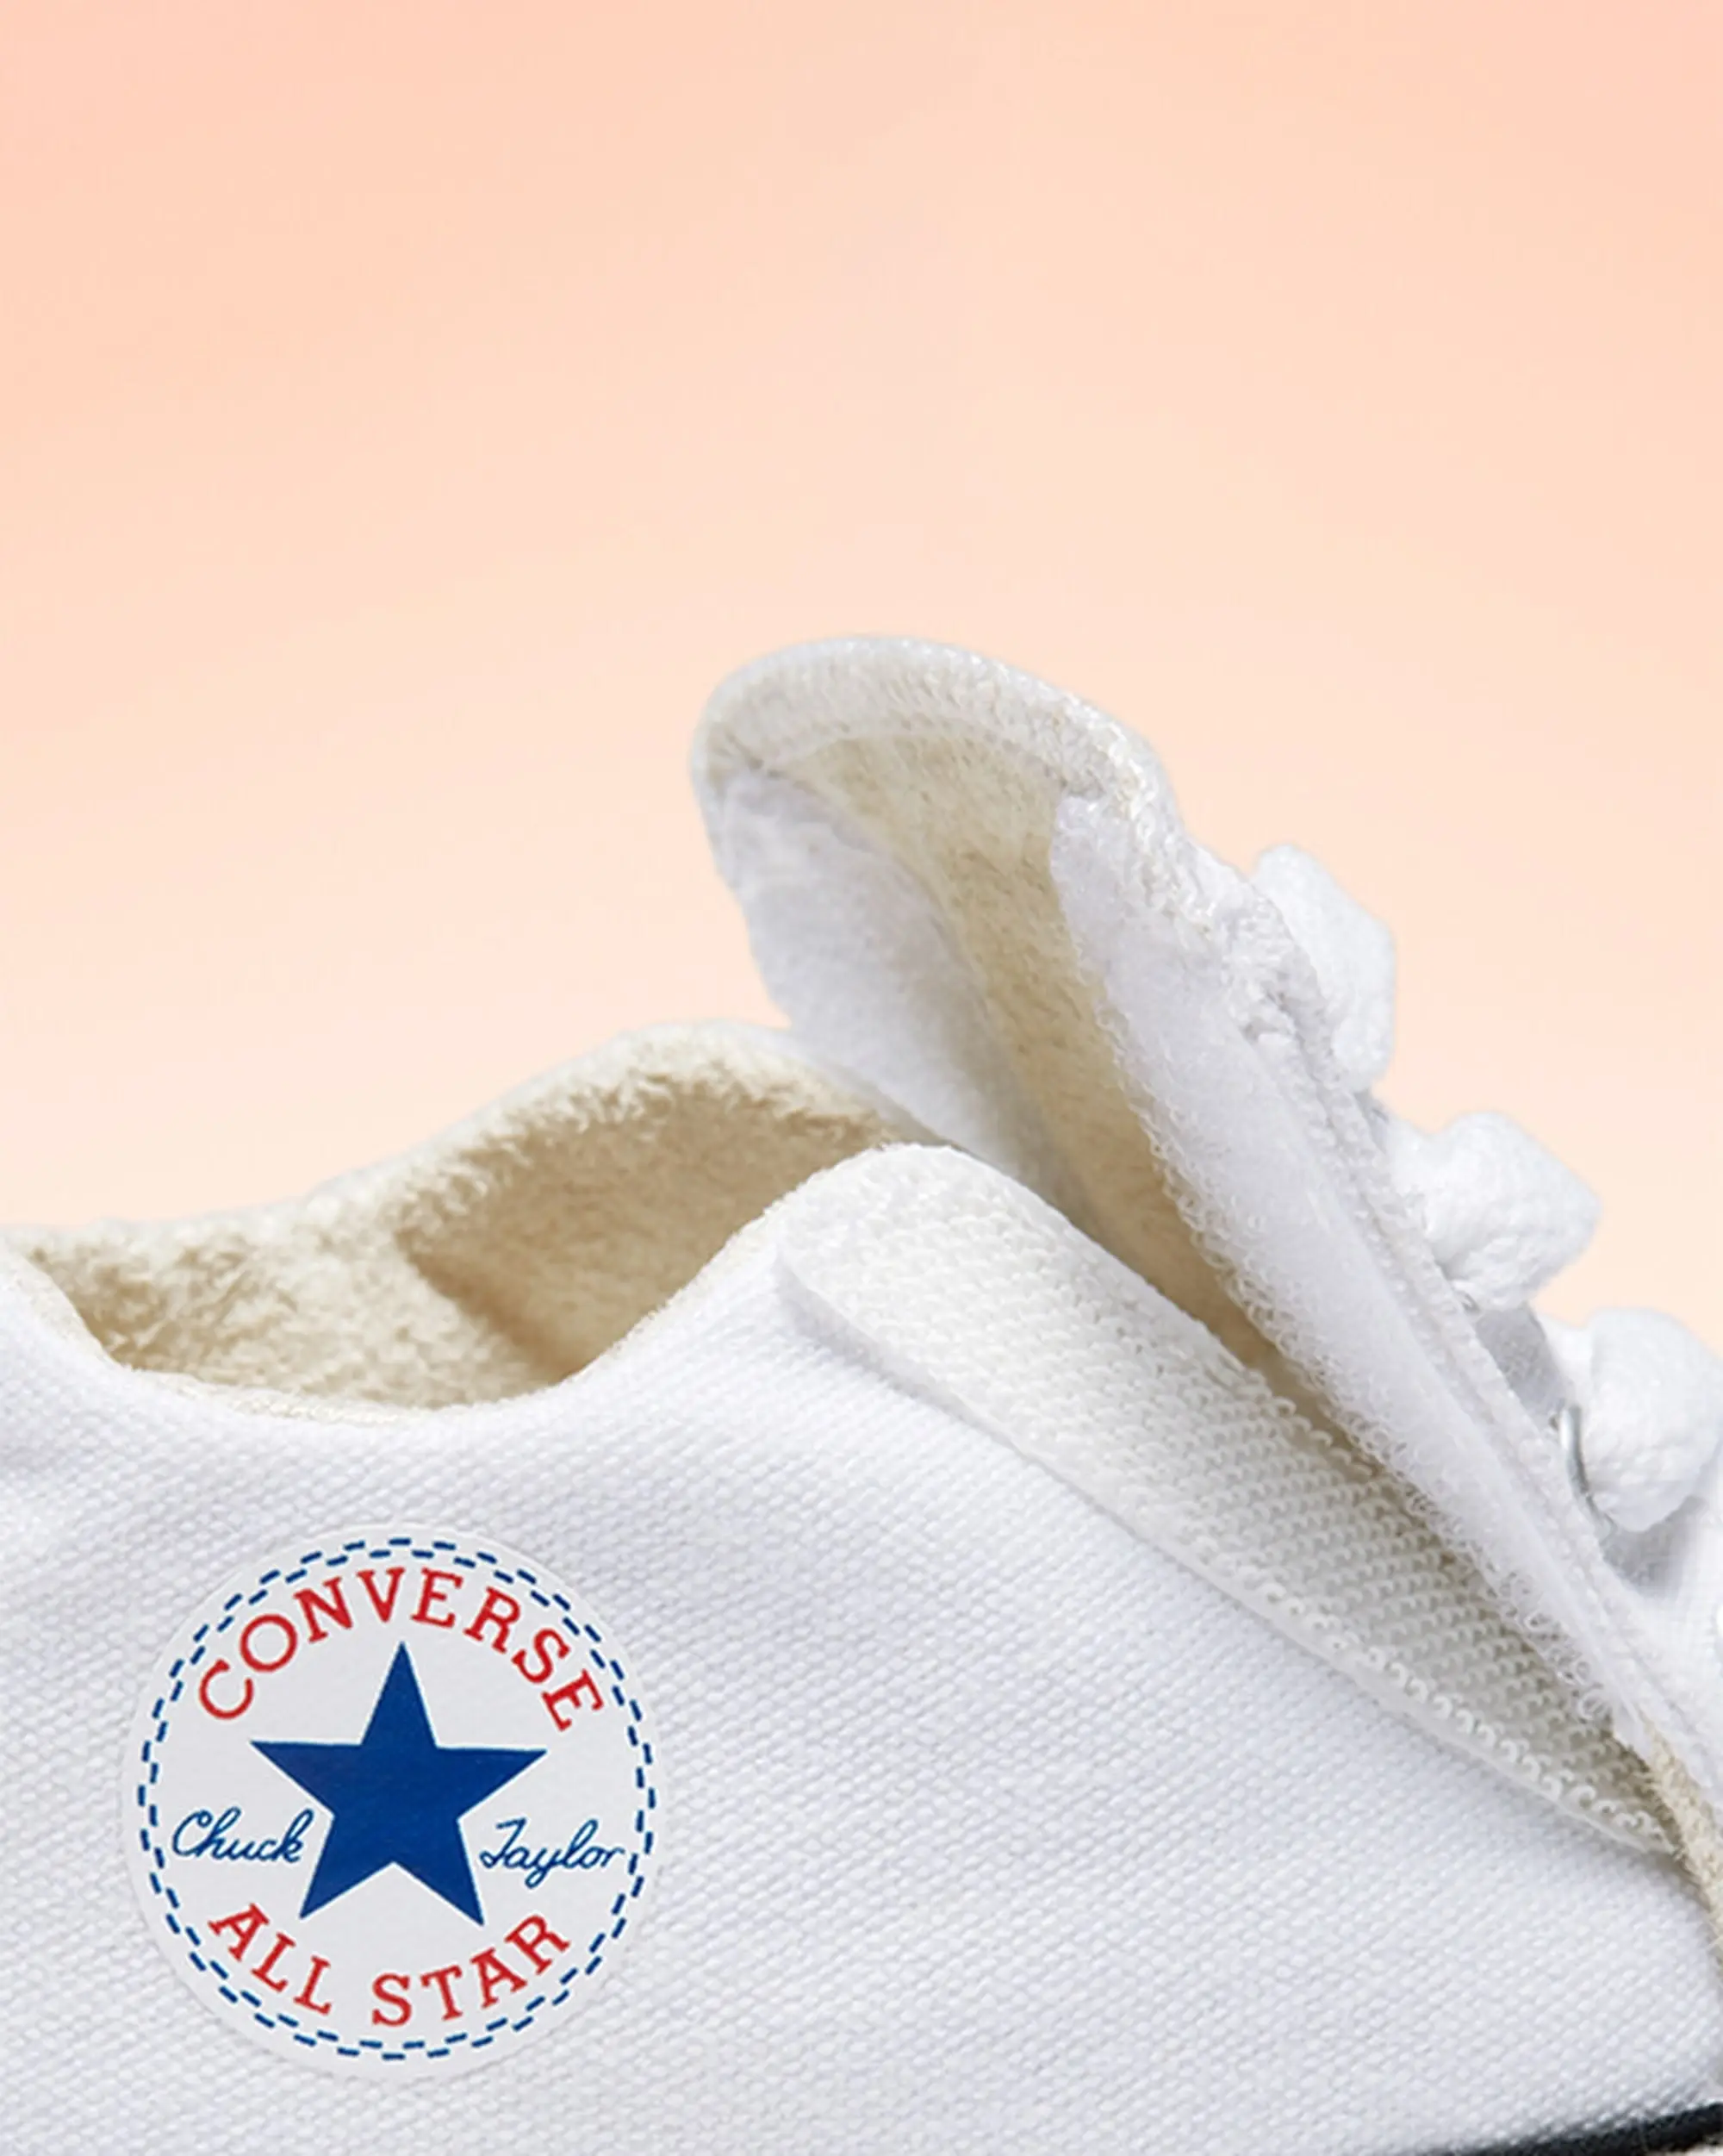 Converse Chuck Taylor All Star Cribster - White